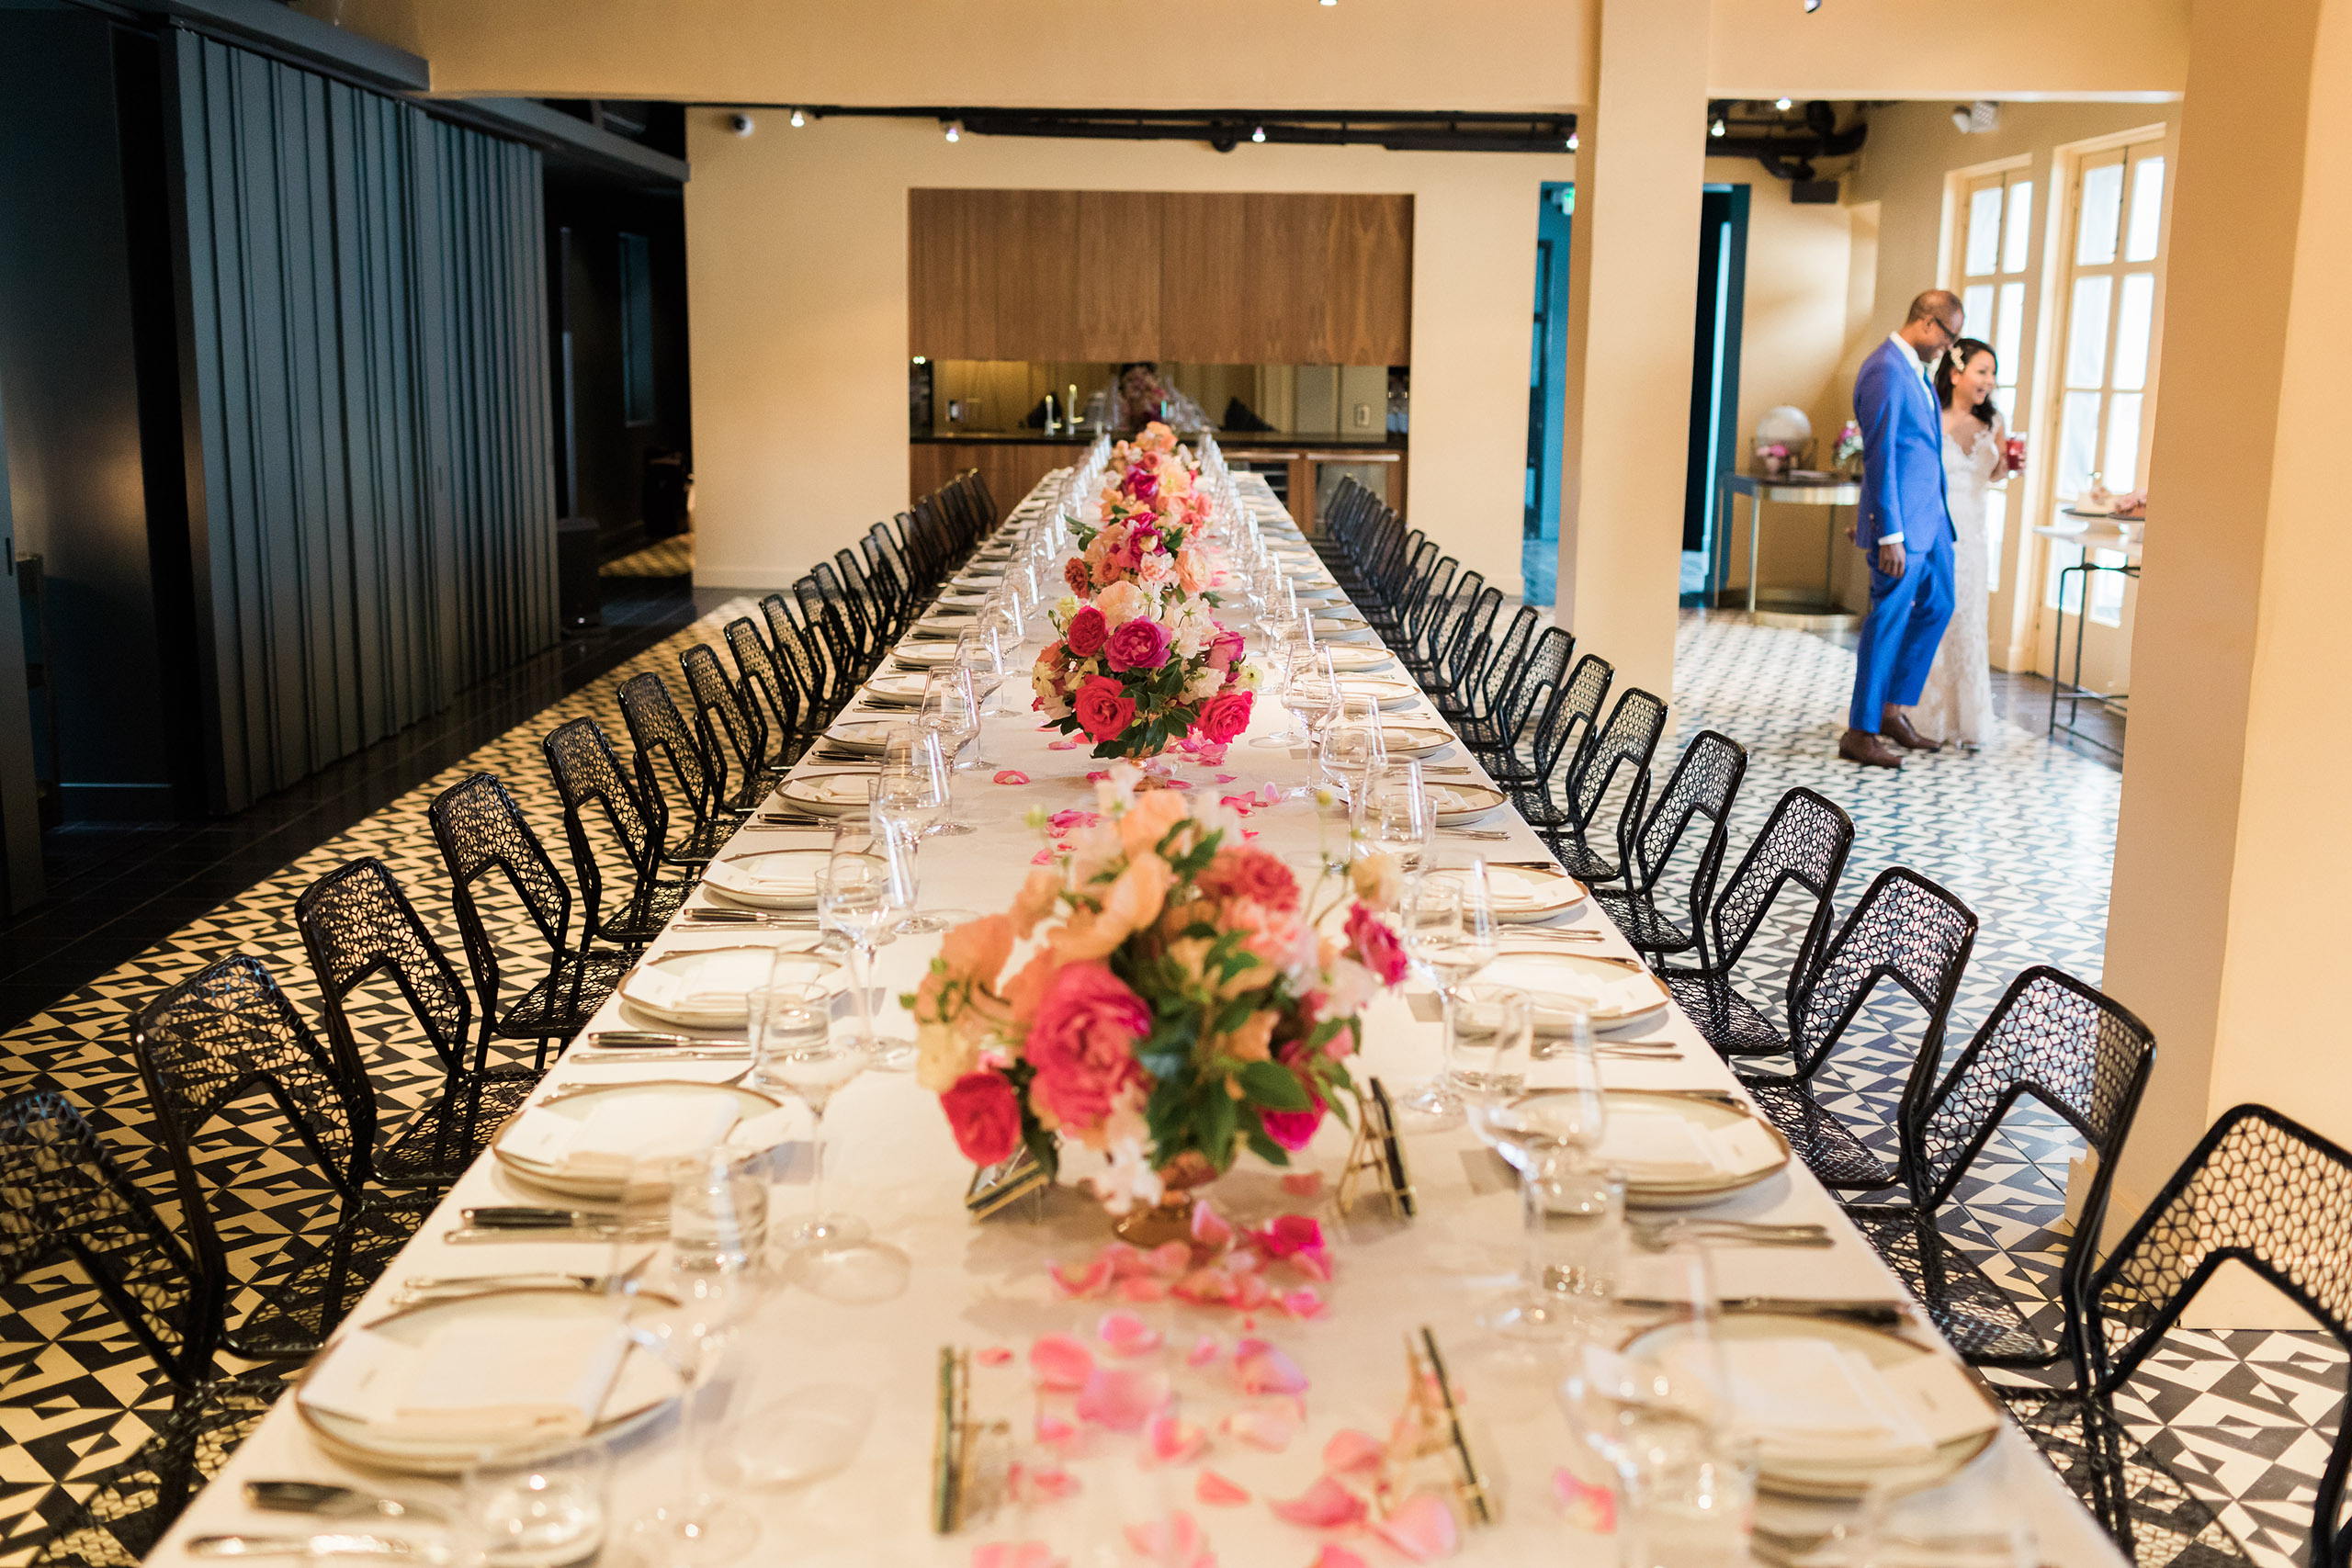 interior dining room with single long table set with flowers and bride and groom in the background